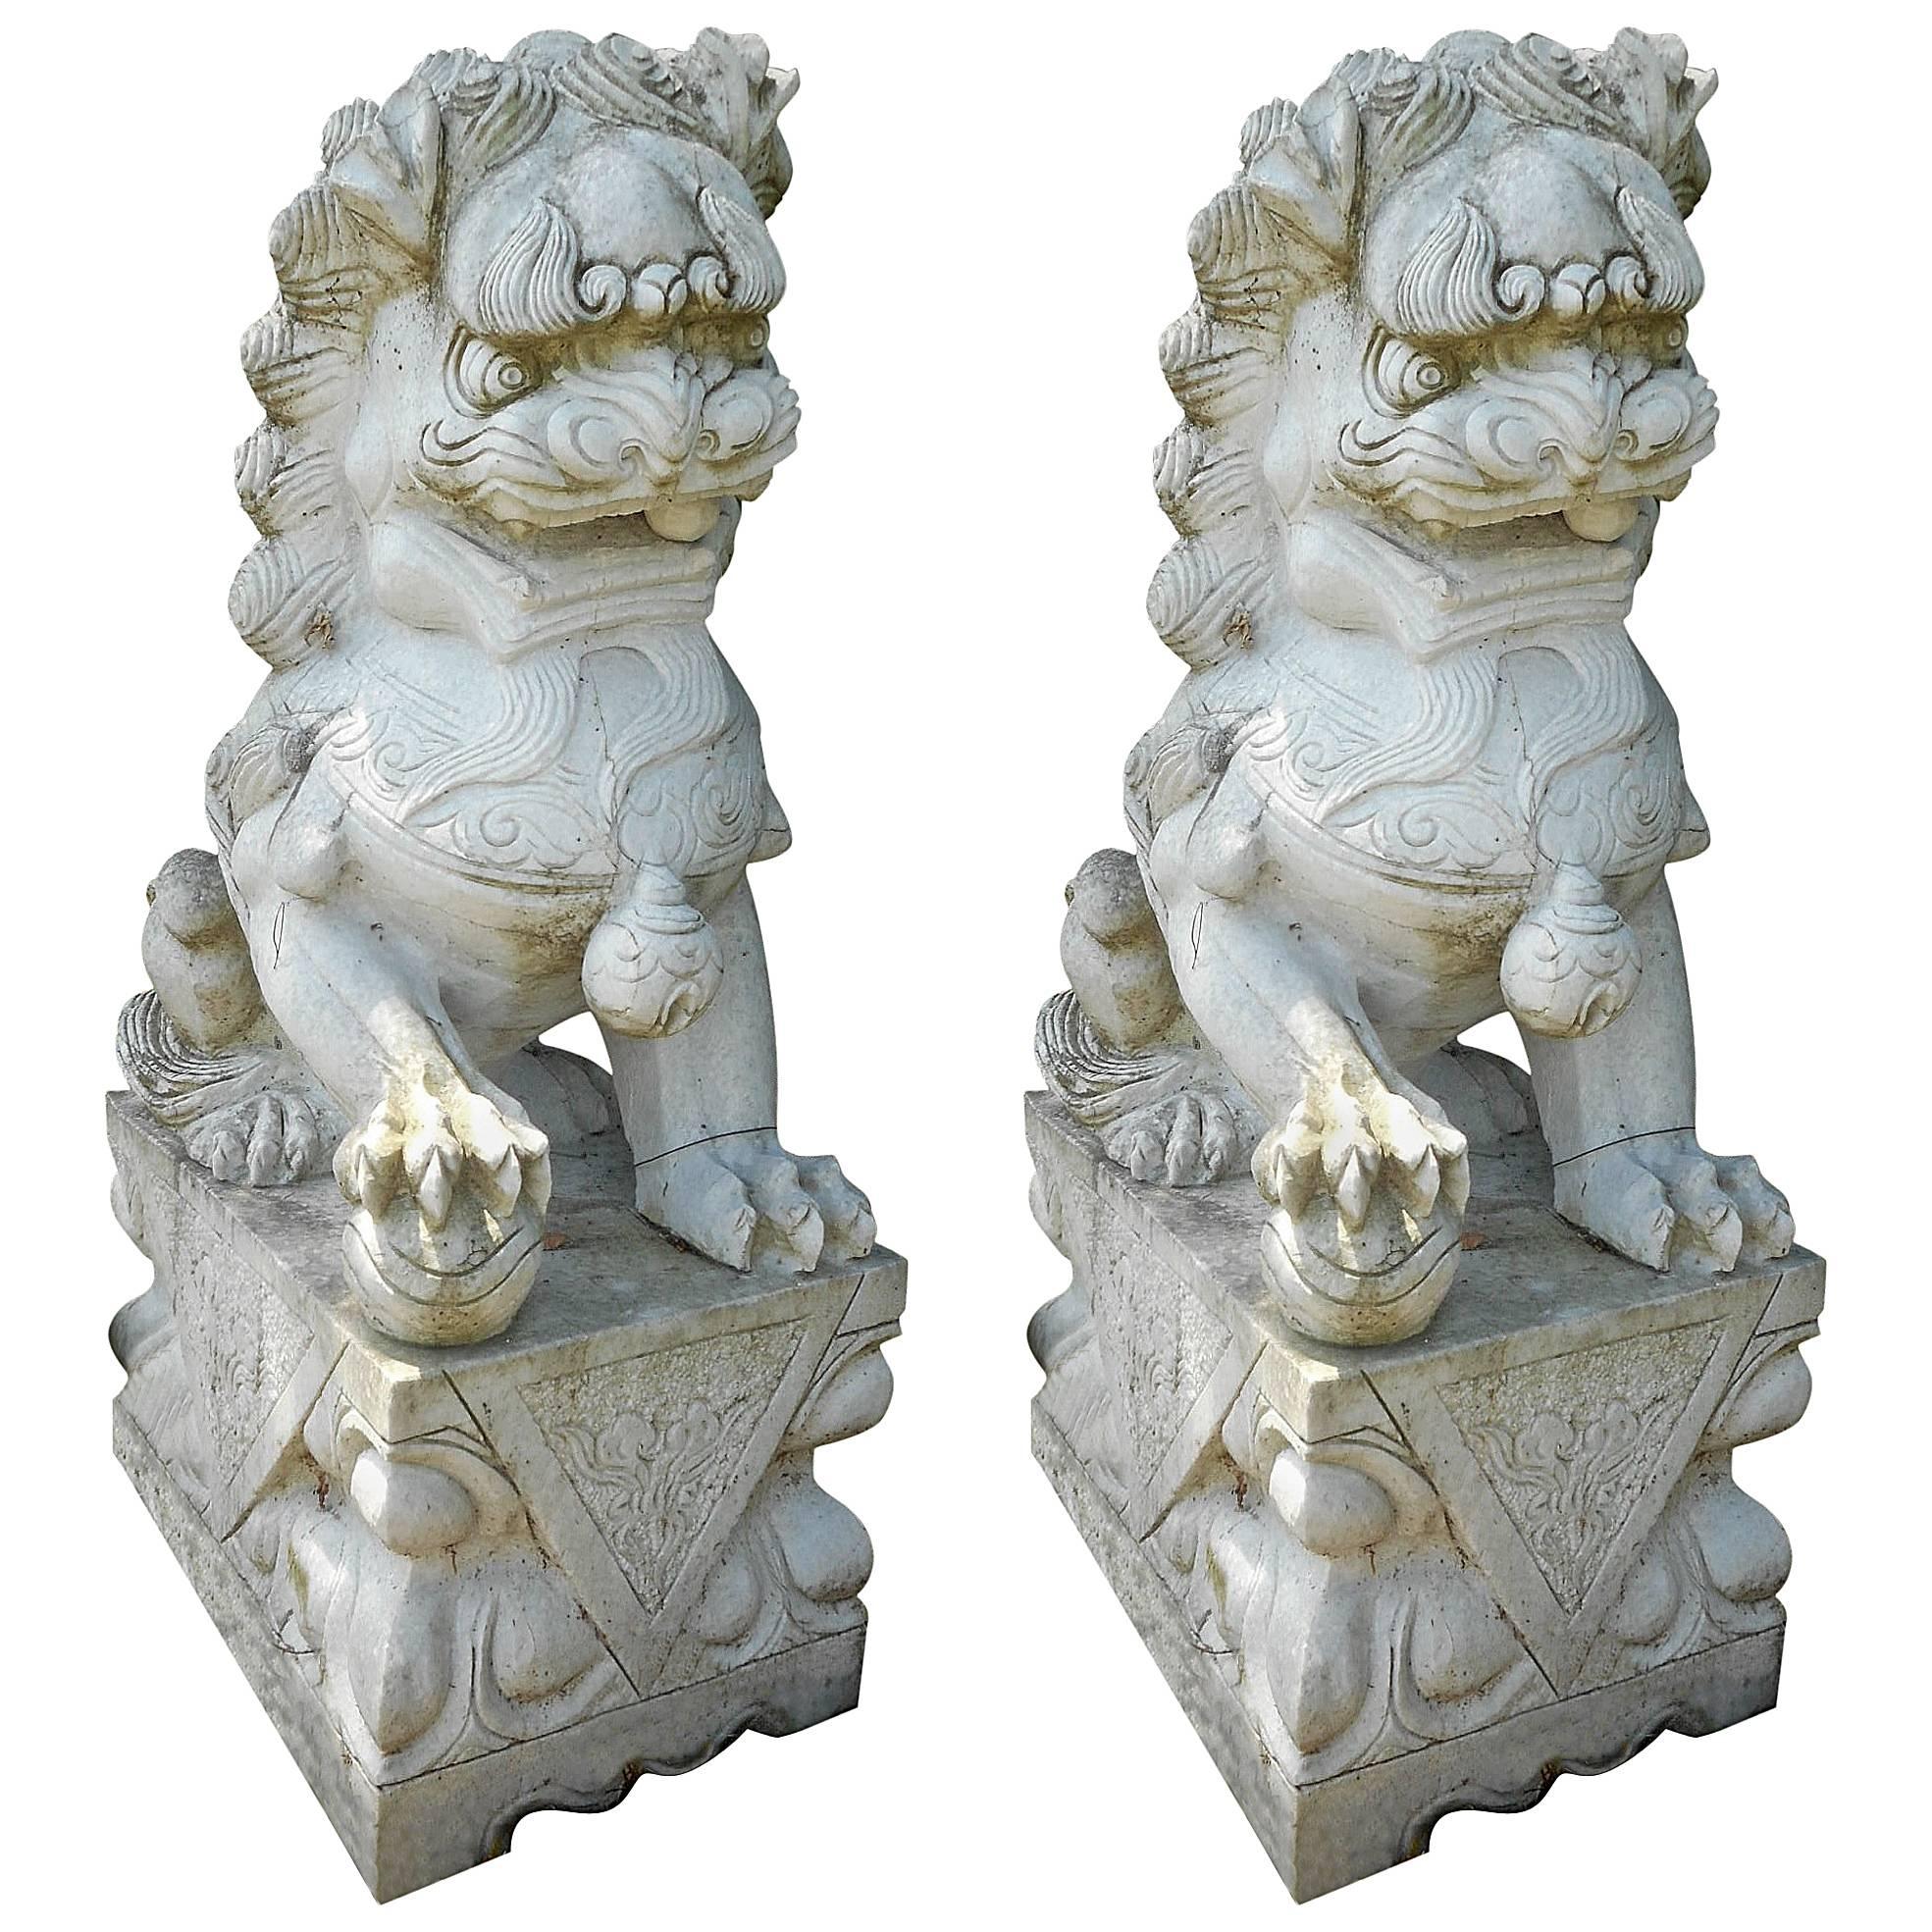 Impressive Pair of Marble Chinese Foo Dog Statues